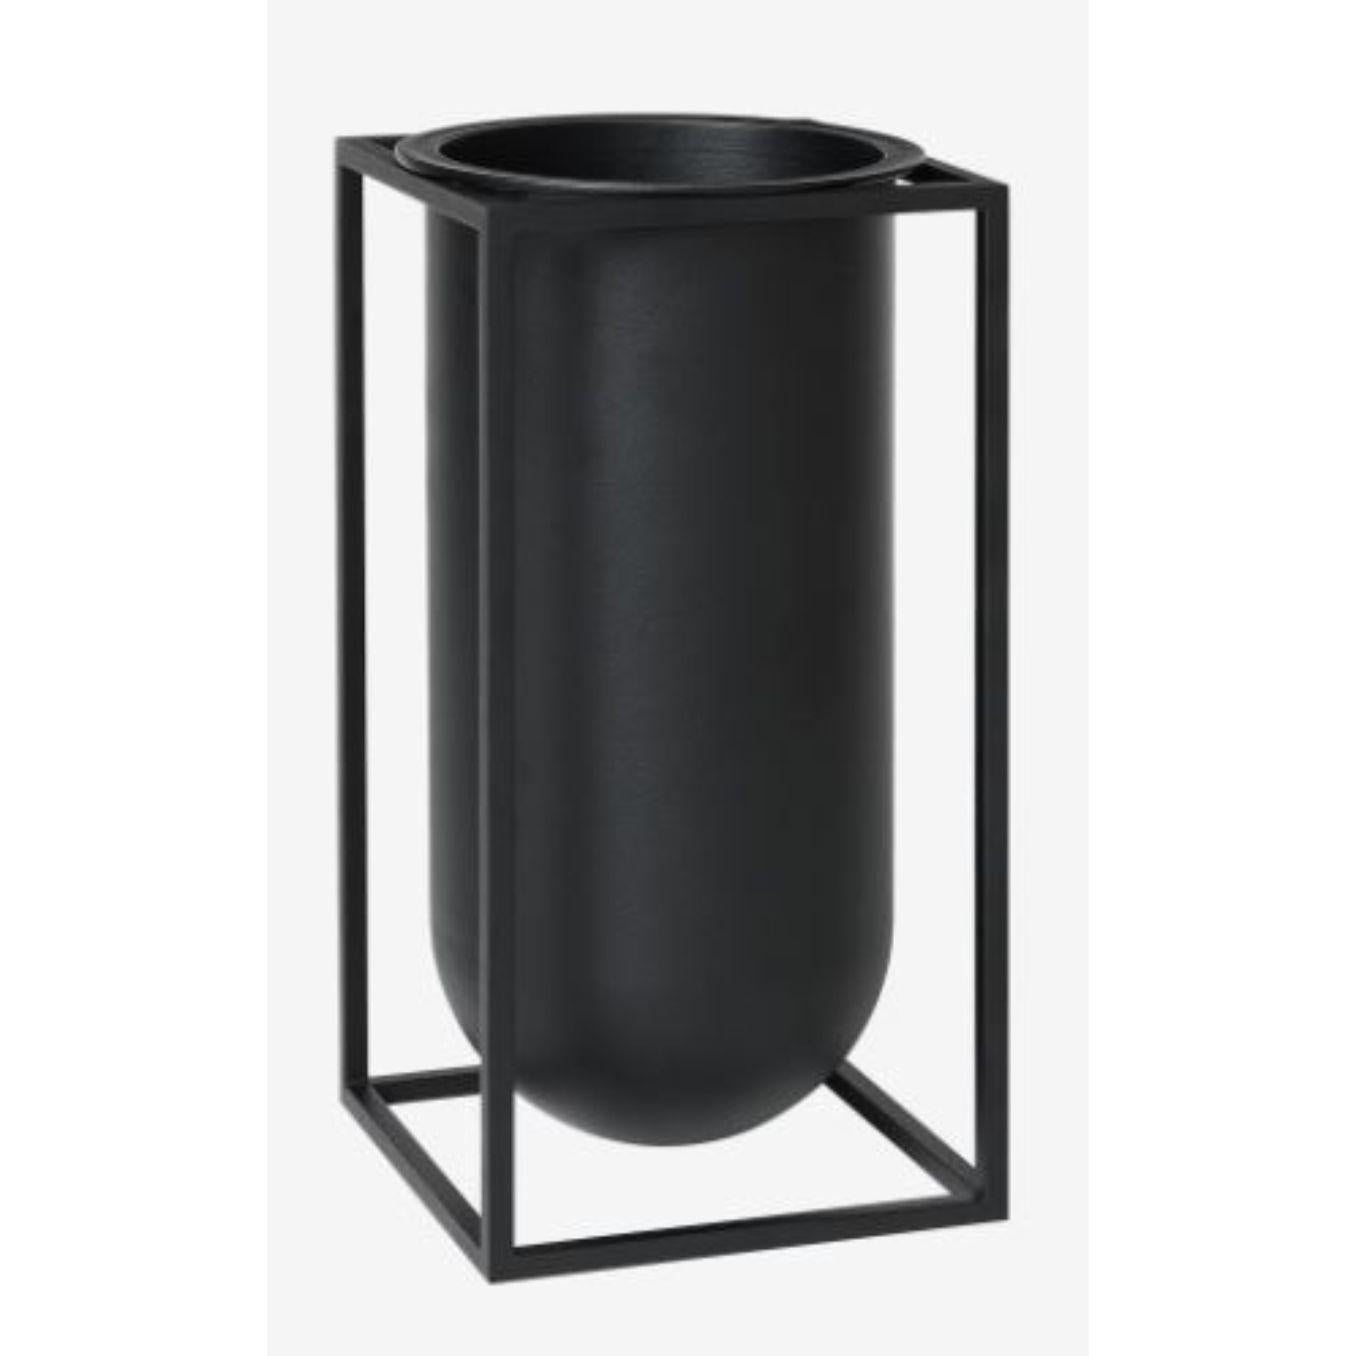 Black Lolo Kubus vase by Lassen
Dimensions: D 12 x W 12 x H 24 cm 
Materials: Metal 
Weight: 2.50 Kg

Kubus Vase Lolo was originally designed by Søren Lassen in 2014, but was launched in celebration of by Lassen’s 10th anniversary 2018. The